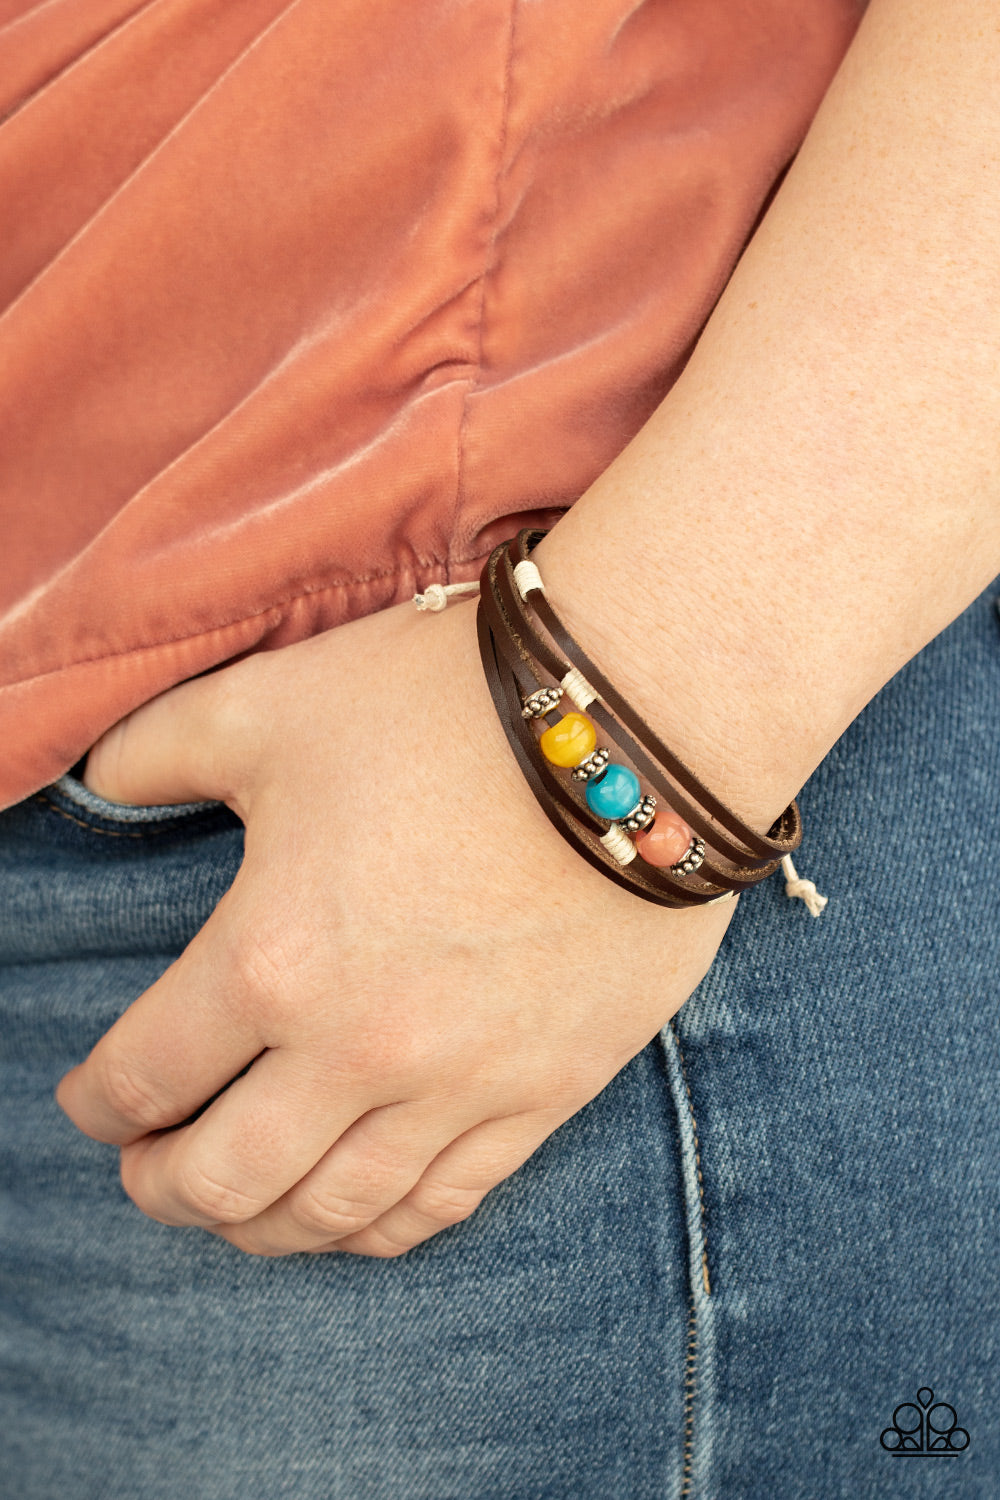 Homespun Radiance Multi Urban Bracelet - Paparazzi Accessories  Infused with studded silver accents, a row of Desert Mist, Blue Tint, and Illuminating cat's eye stone beads adorn the centermost strand of layered leather bands around the wrist for a colorful seasonal look. Features an adjustable sliding knot closure.  All Paparazzi Accessories are lead free and nickel free!  Sold as one individual bracelet.